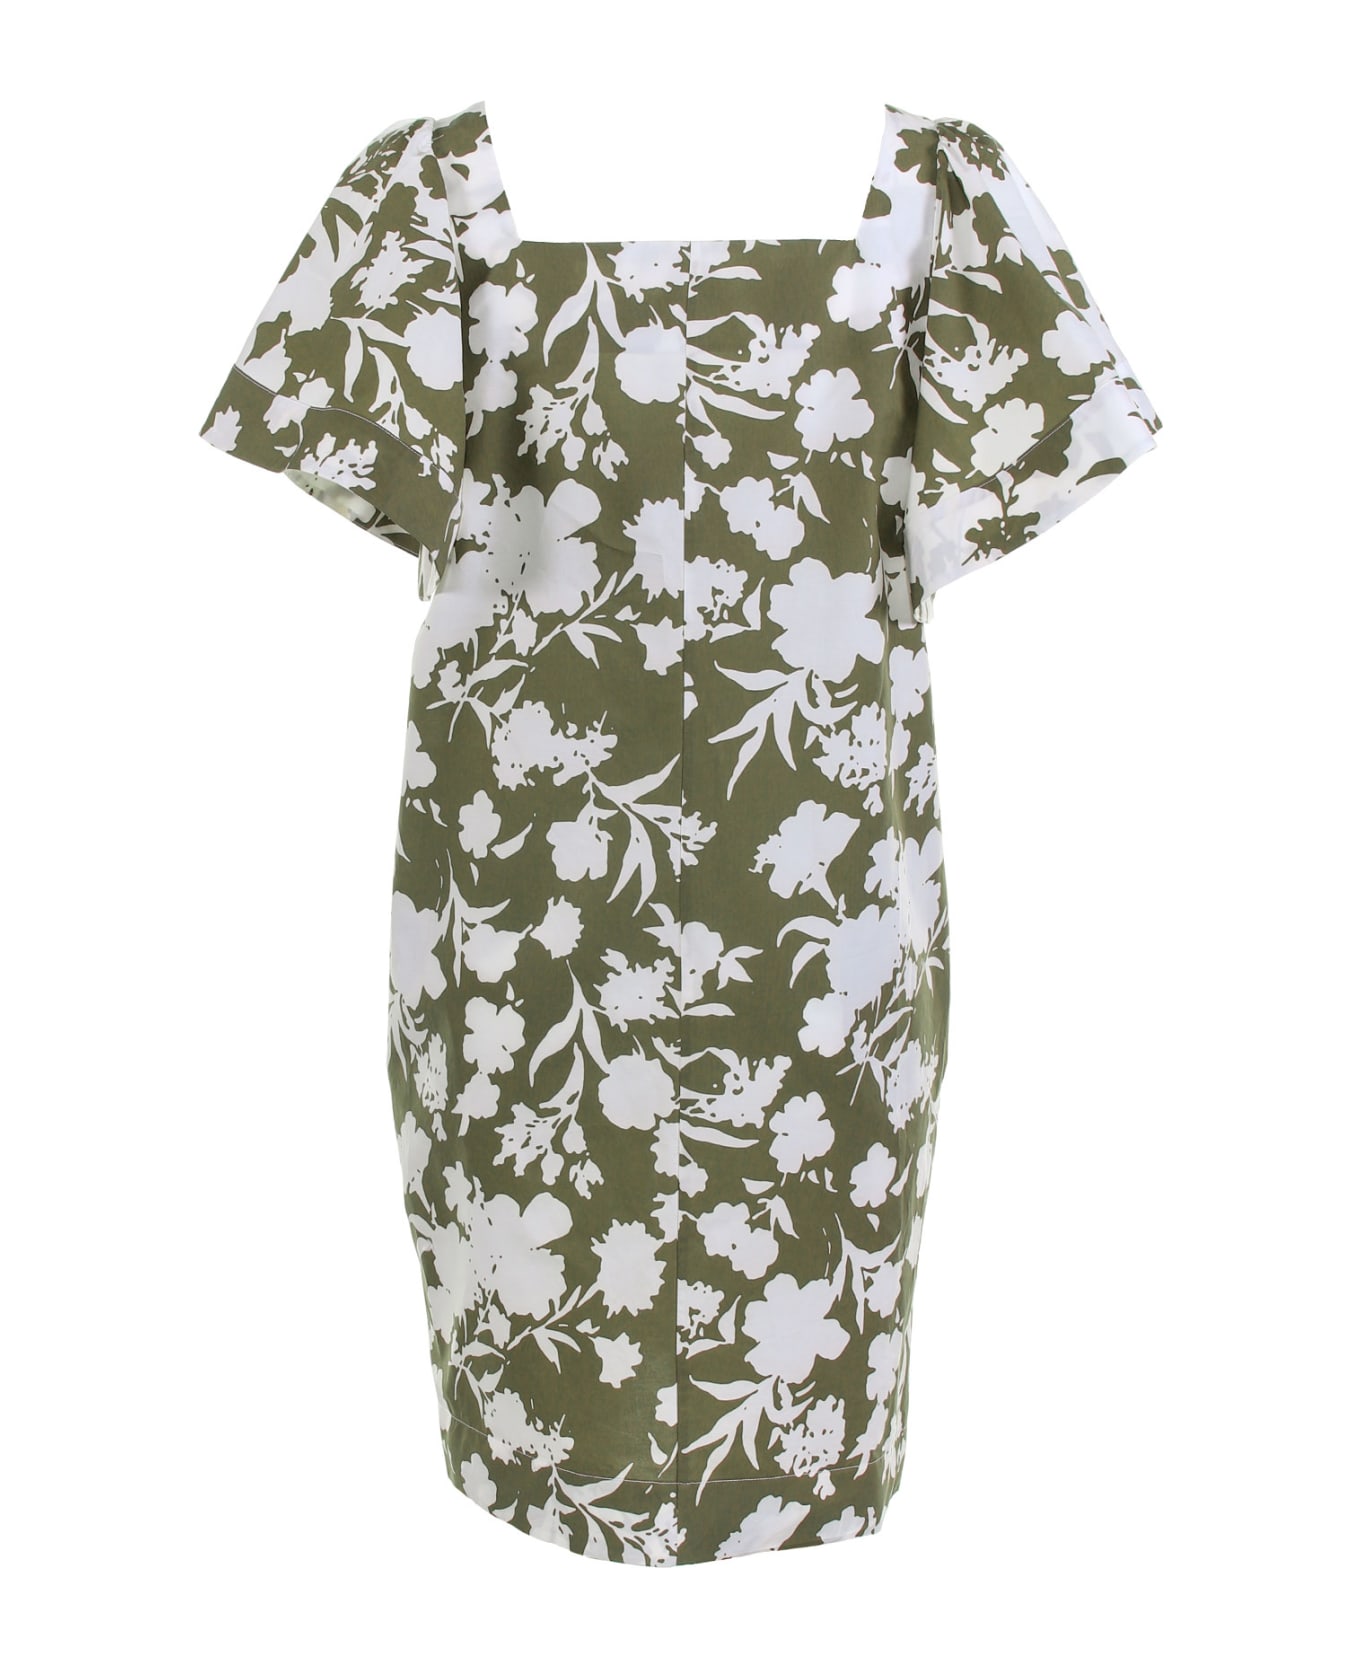 Barba Napoli Dress With Butterfly Sleeve - VERDE MILITARE